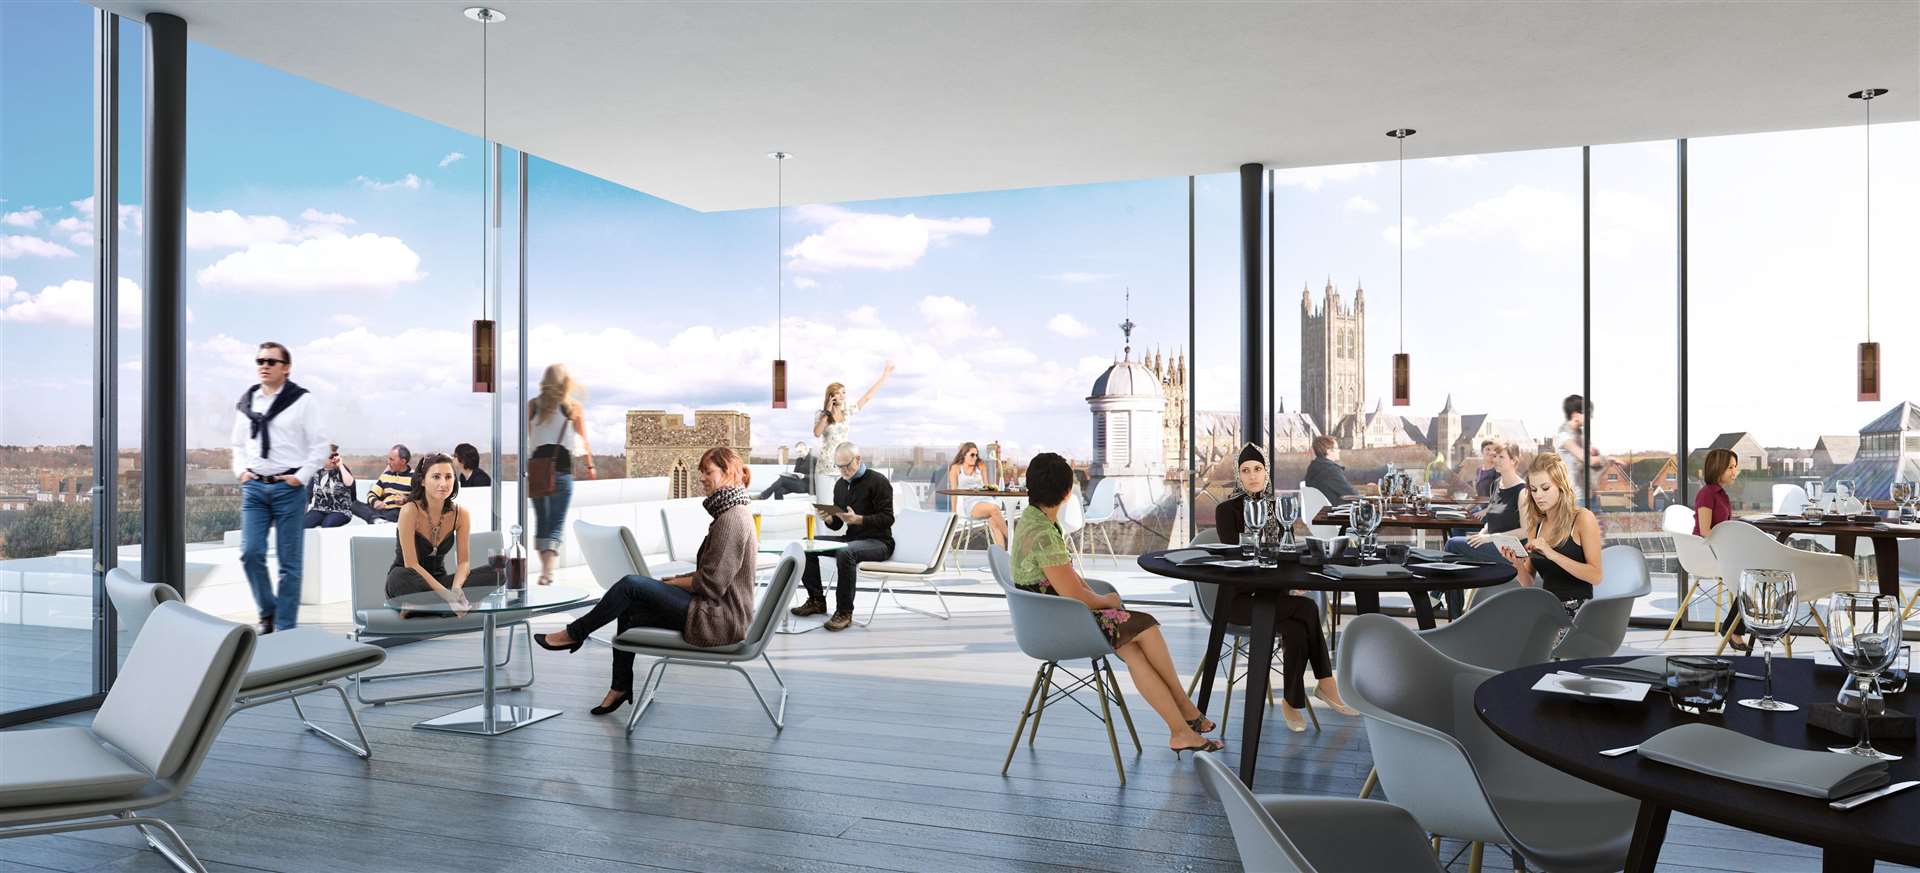 The hotel will boast a top-floor restaurant with views across the city